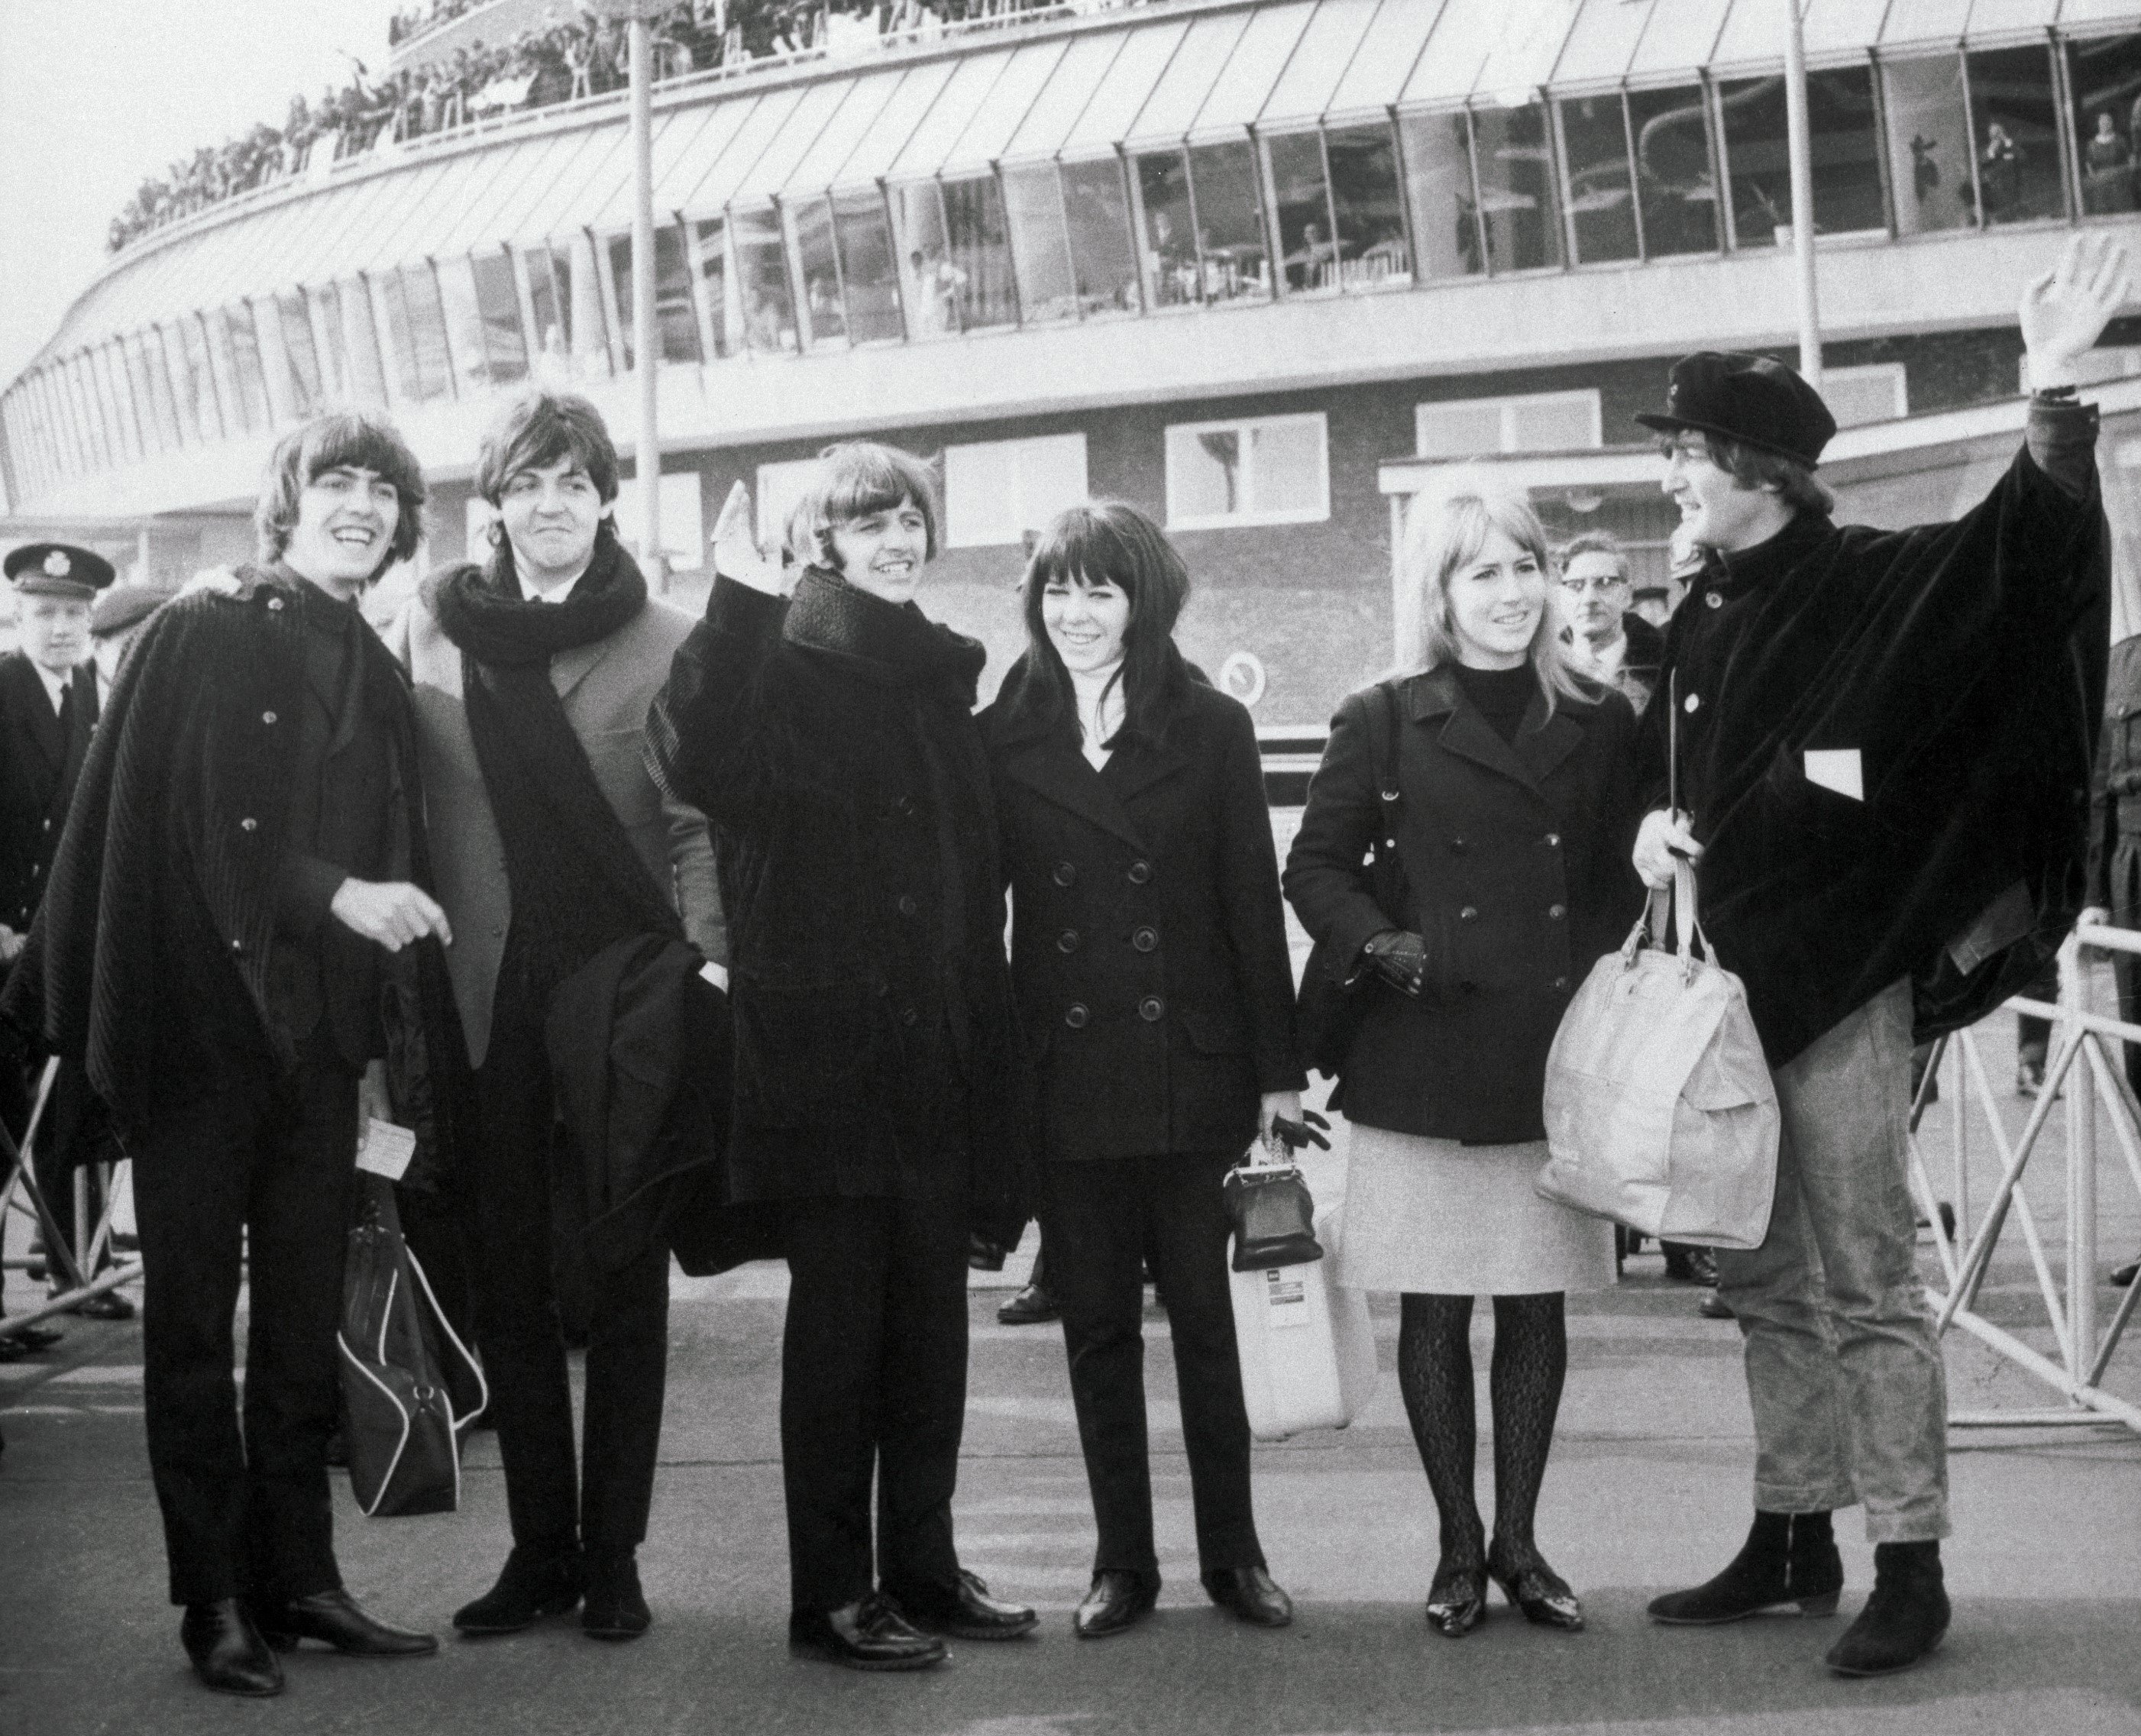 A black and white picture of George Harrison, Paul McCartney, Ringo Starr ,Maureen Starkey, Cynthia Lennon, and John Lennon at the airport.